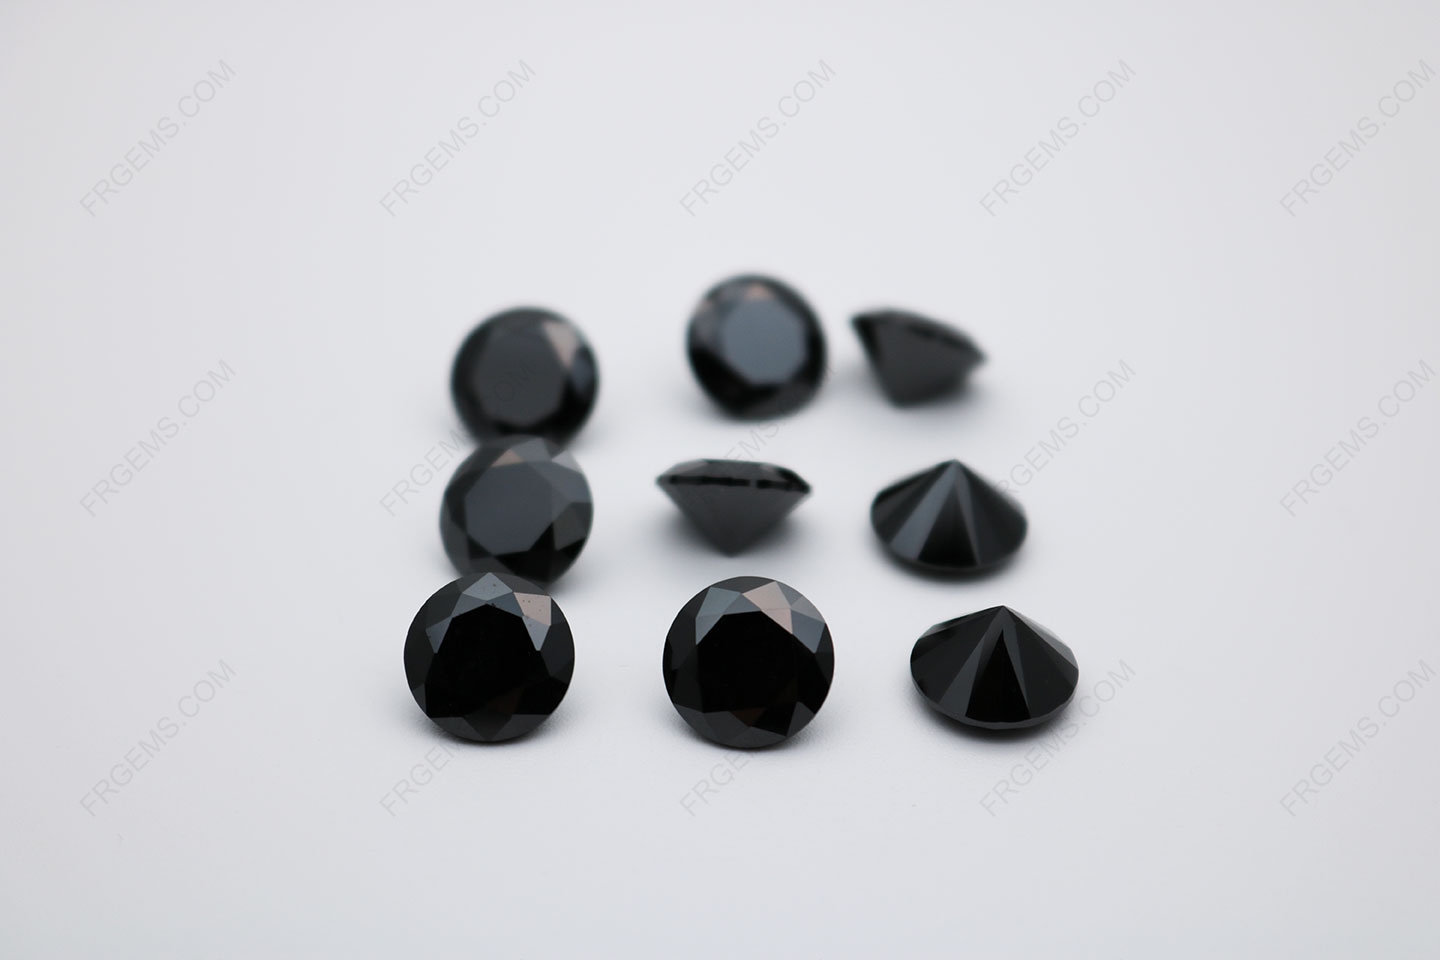 Cubic_Zirconia_Black_Color_Round_Shape_faceted_10mm_stones_IMG_0245